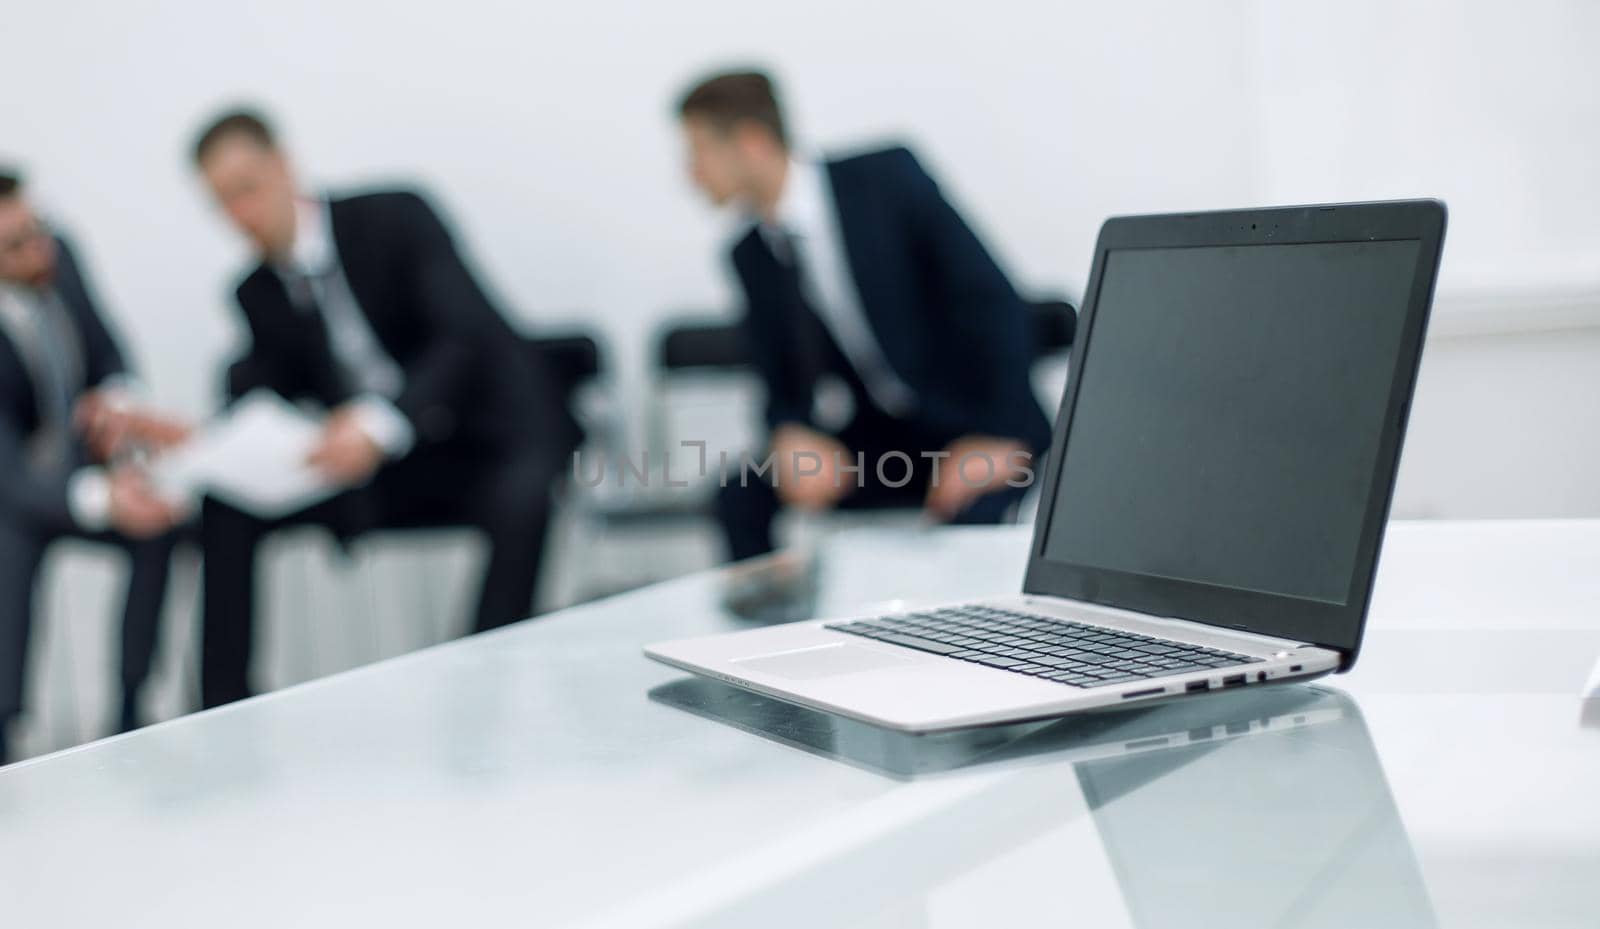 background image office reception. laptop on table by asdf